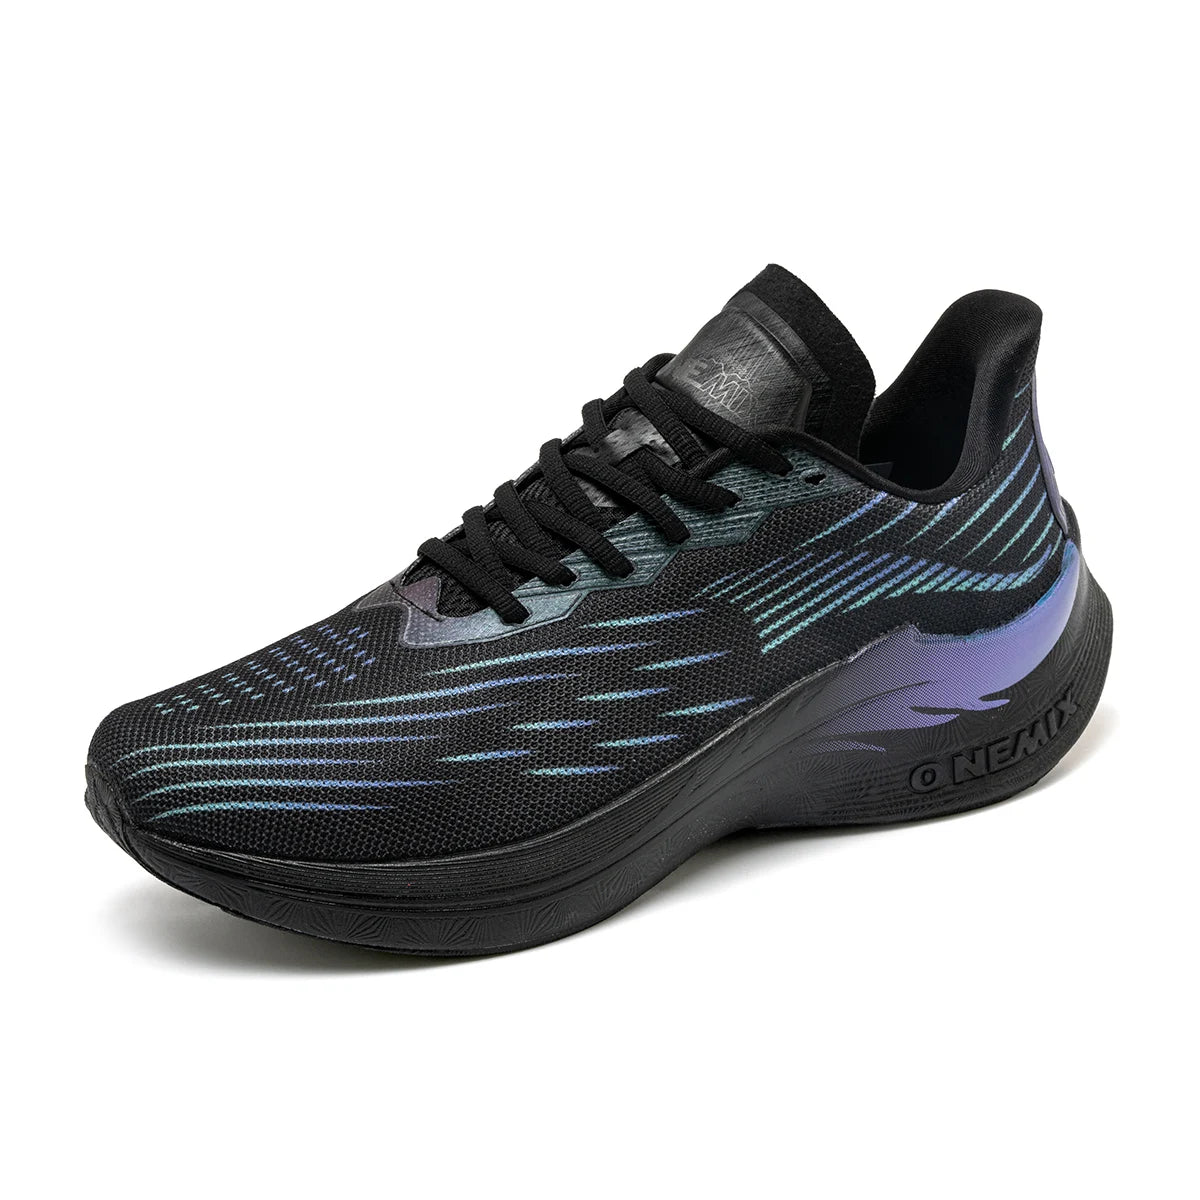 Breathable Mesh Running Shoes Cushioning Slip on Sport Shoes Casual Soft Outdoor Male Walking Sneakers Jogging Shoes - Sellinashop